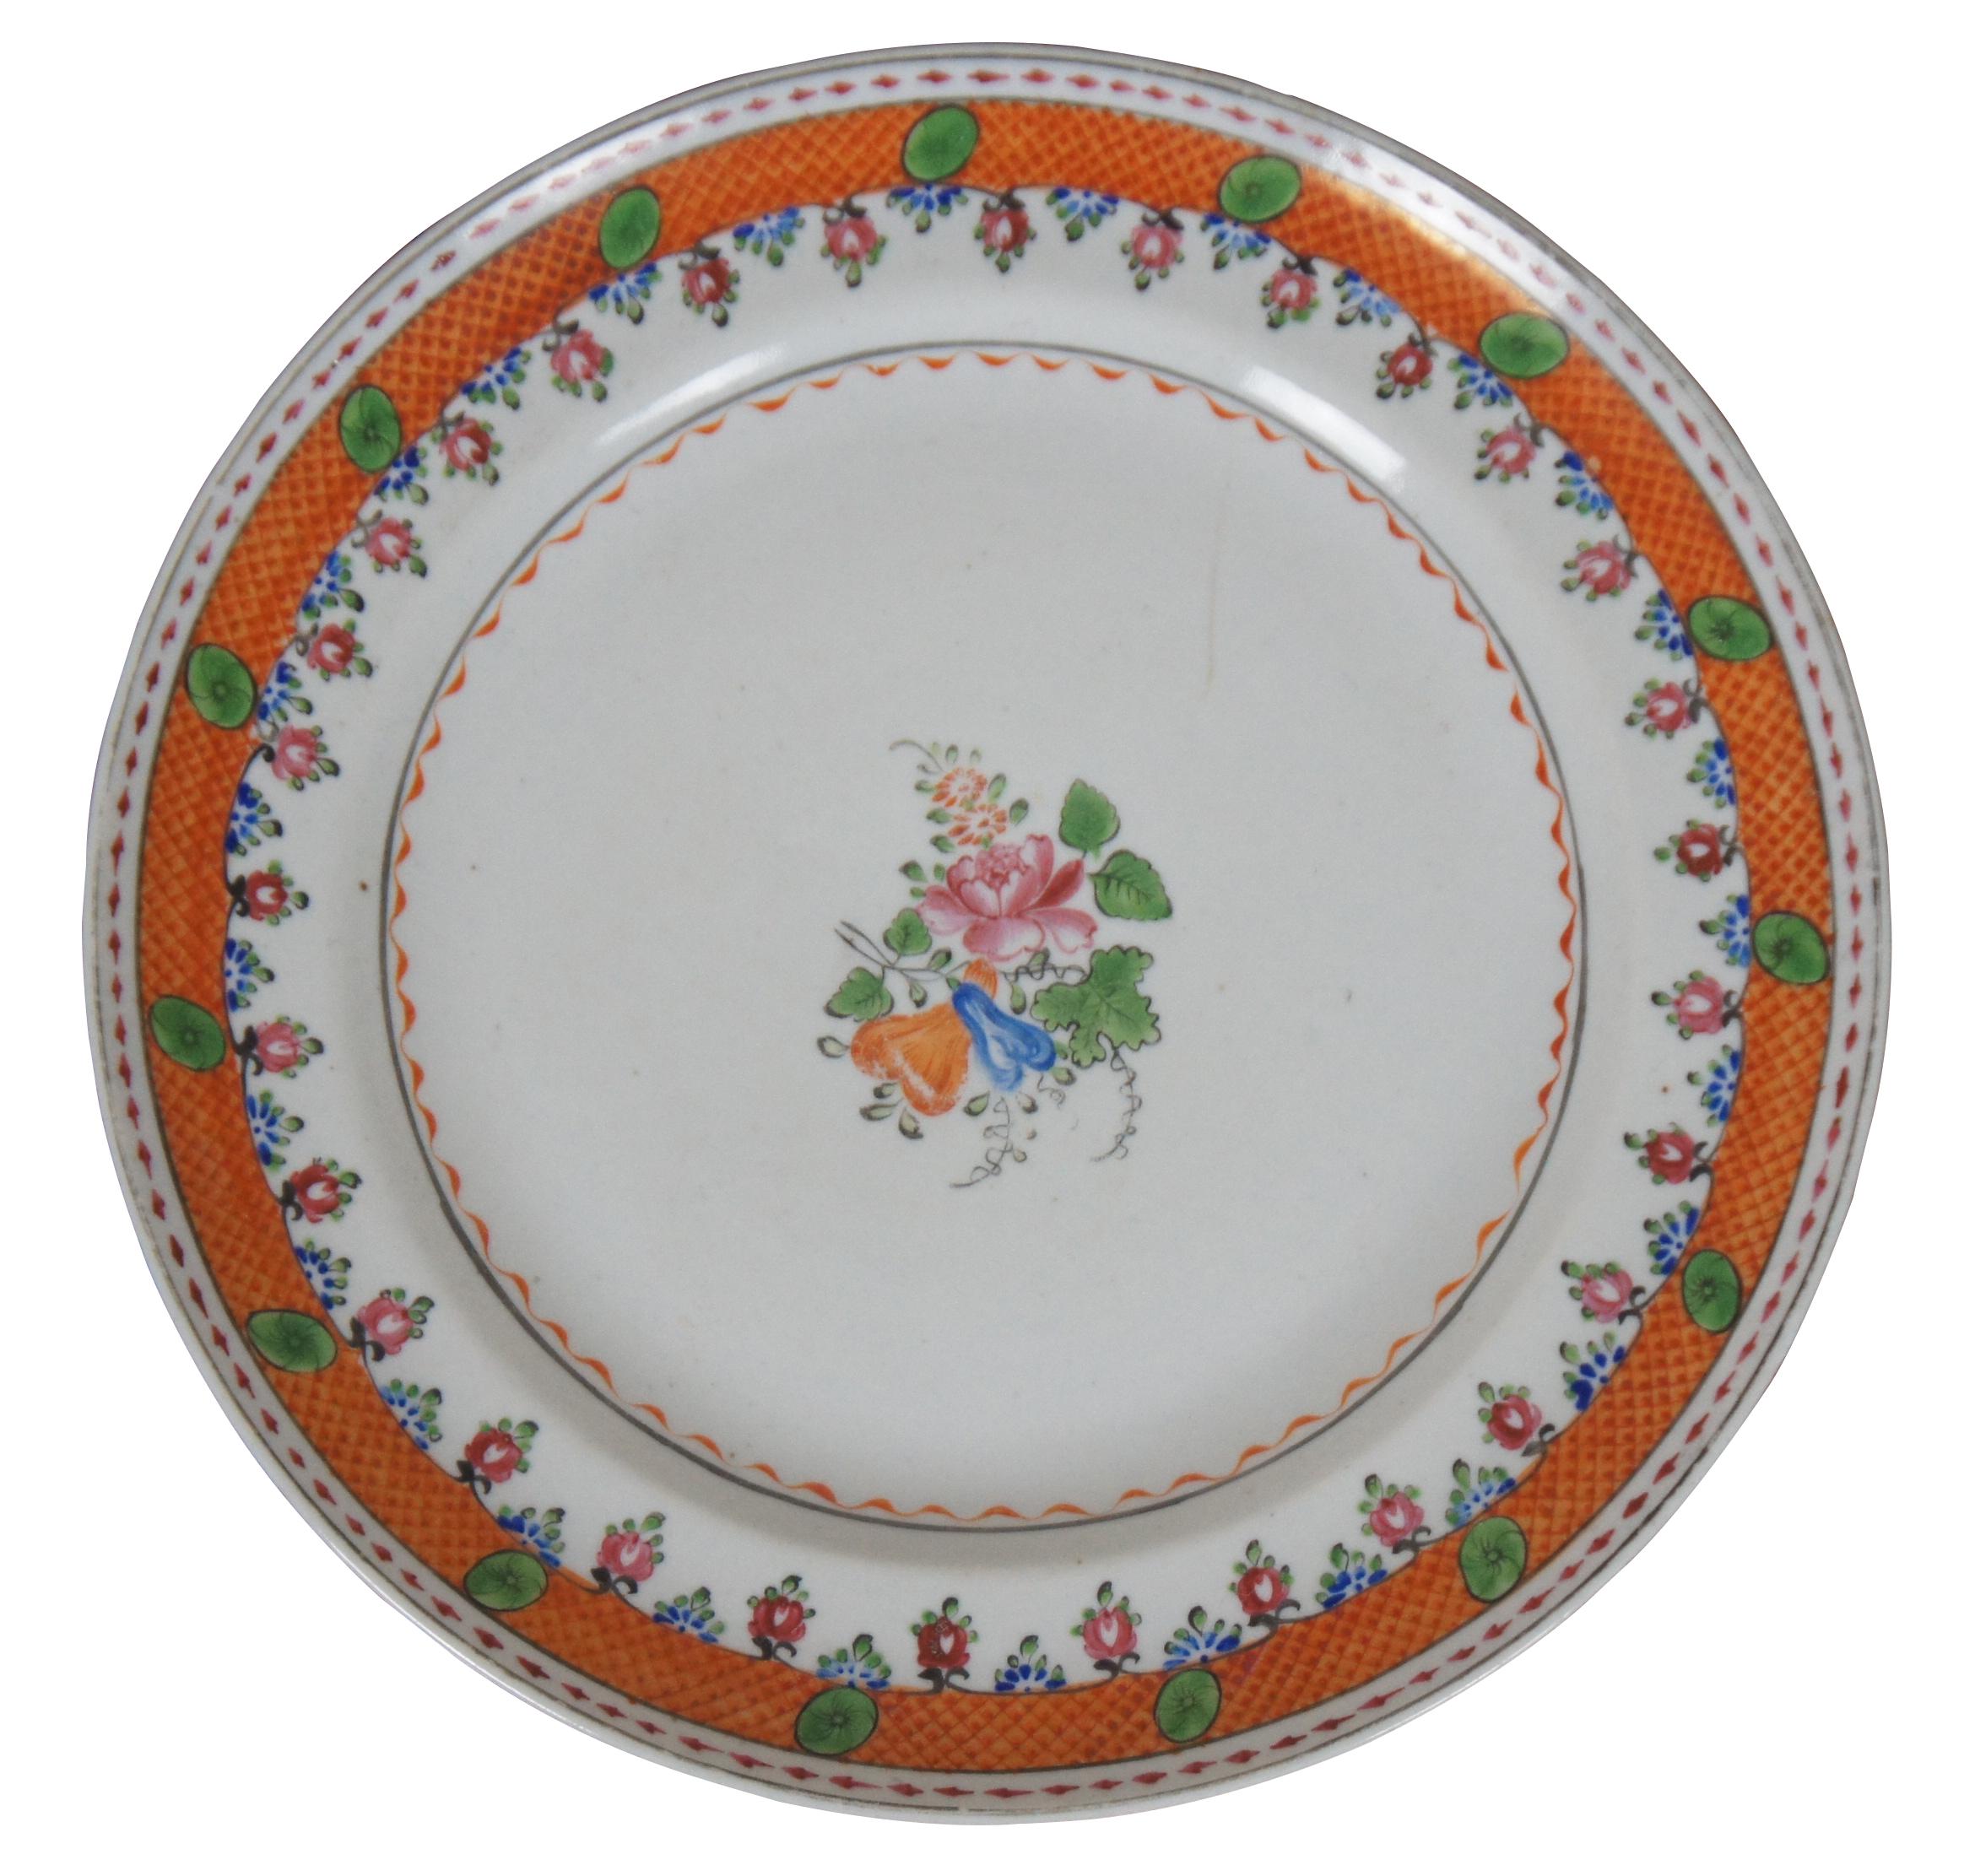 2 Antique 18th Century Chinese Export Qianlong Famille Dinner Charger Plates In Good Condition For Sale In Dayton, OH